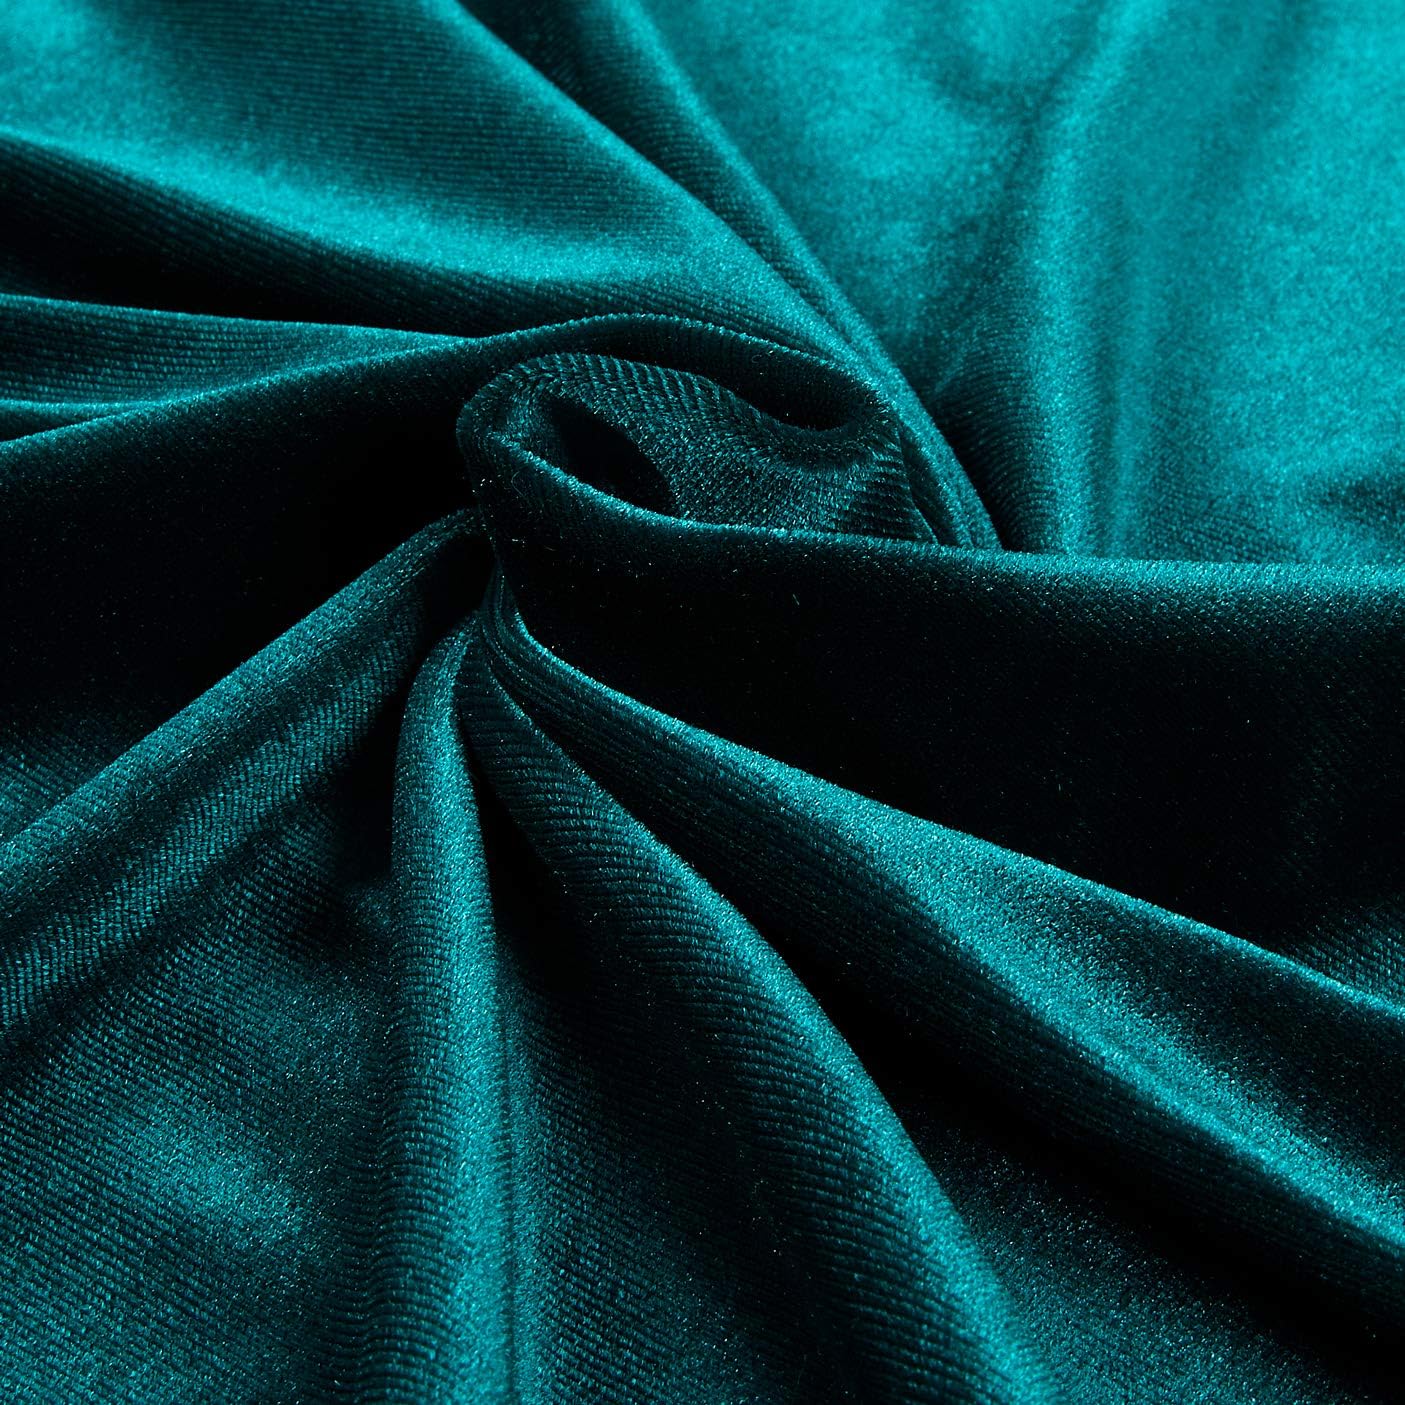 58/60" Teal Stretch Velvet Fabric 60 Yard Roll (Free Shipping)